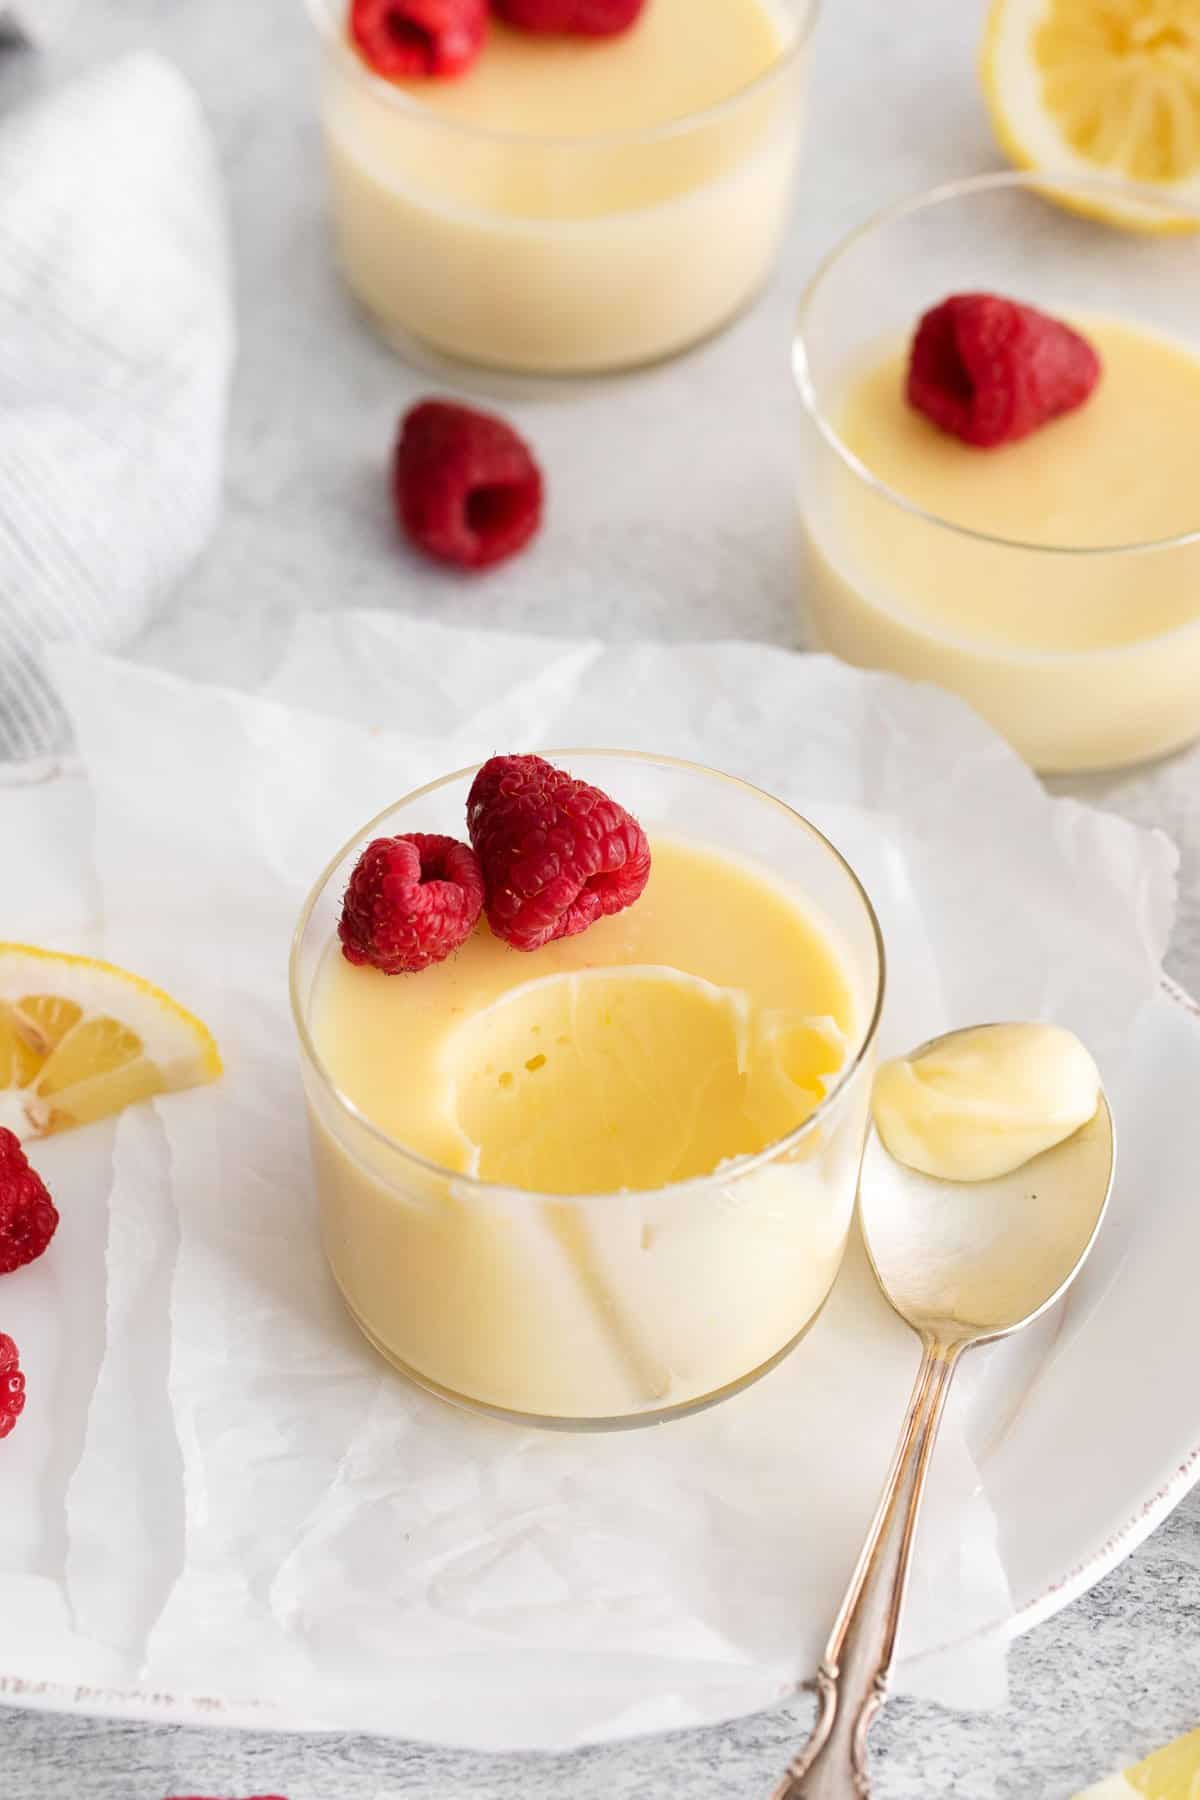 Lemon posset in a small dish with a bite taken out of it, with raspberries on top and a spoon next to it